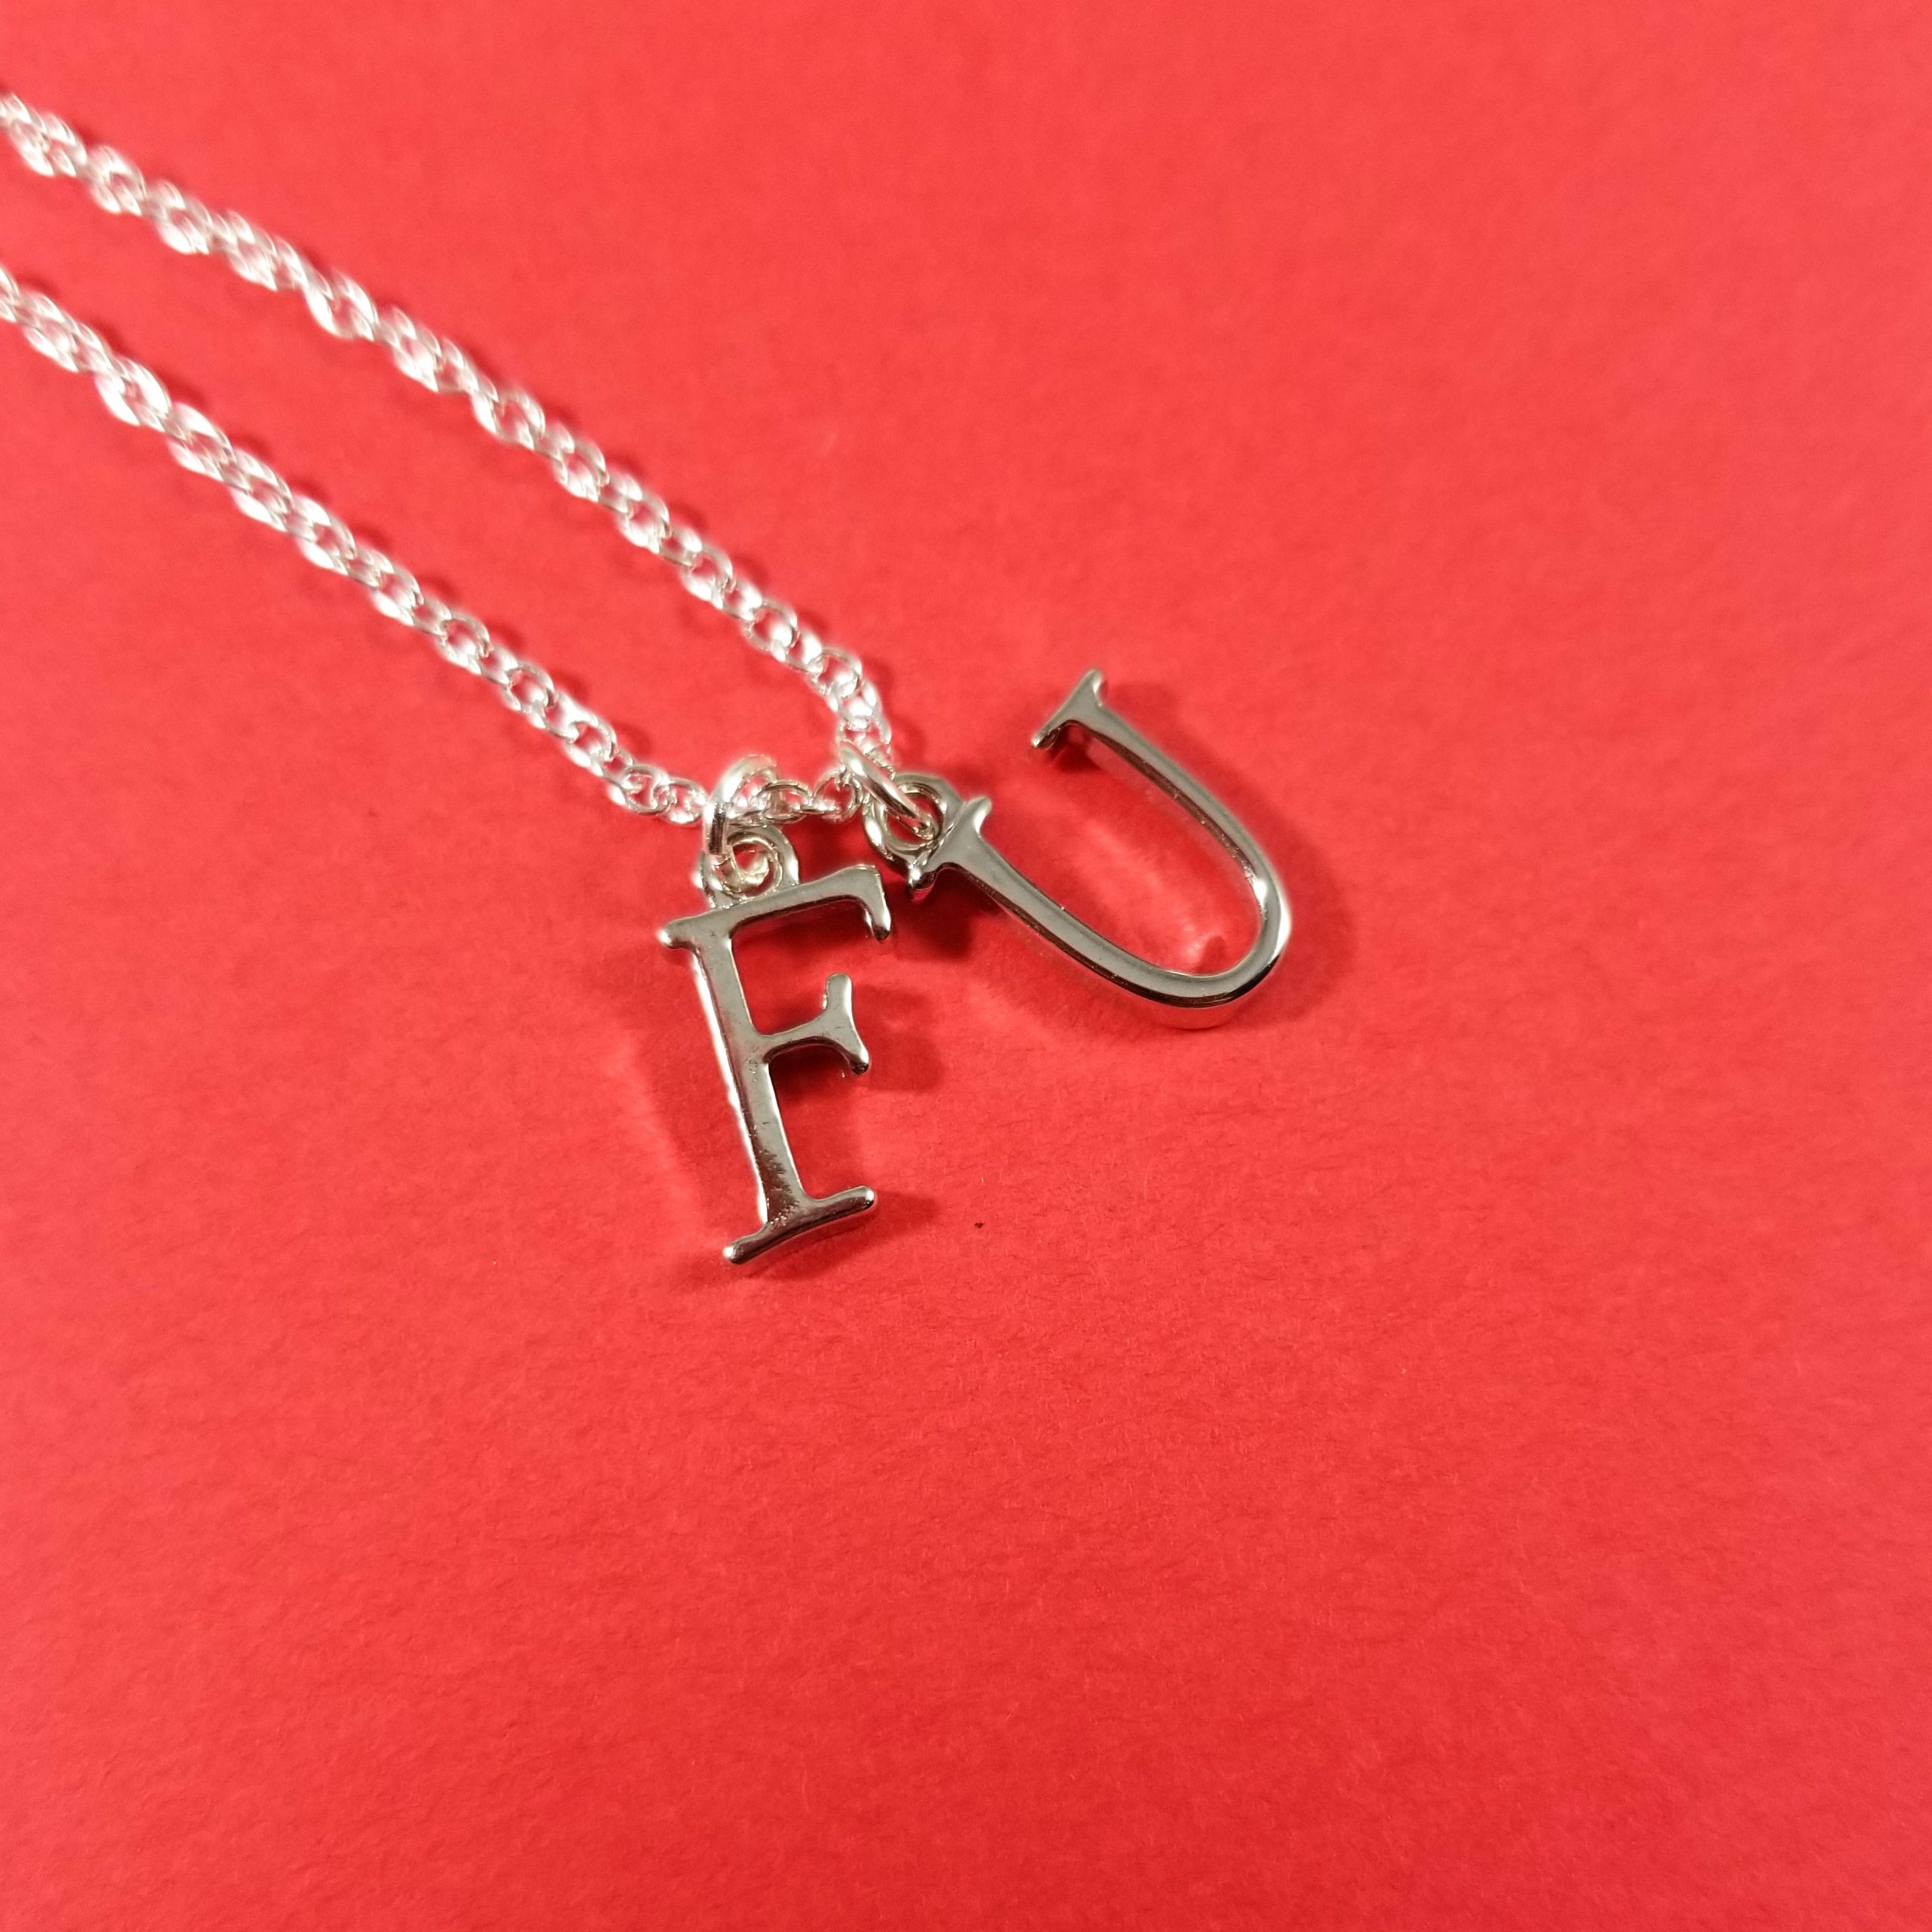 FU Humorous Necklace in Serif by Wilde Designs